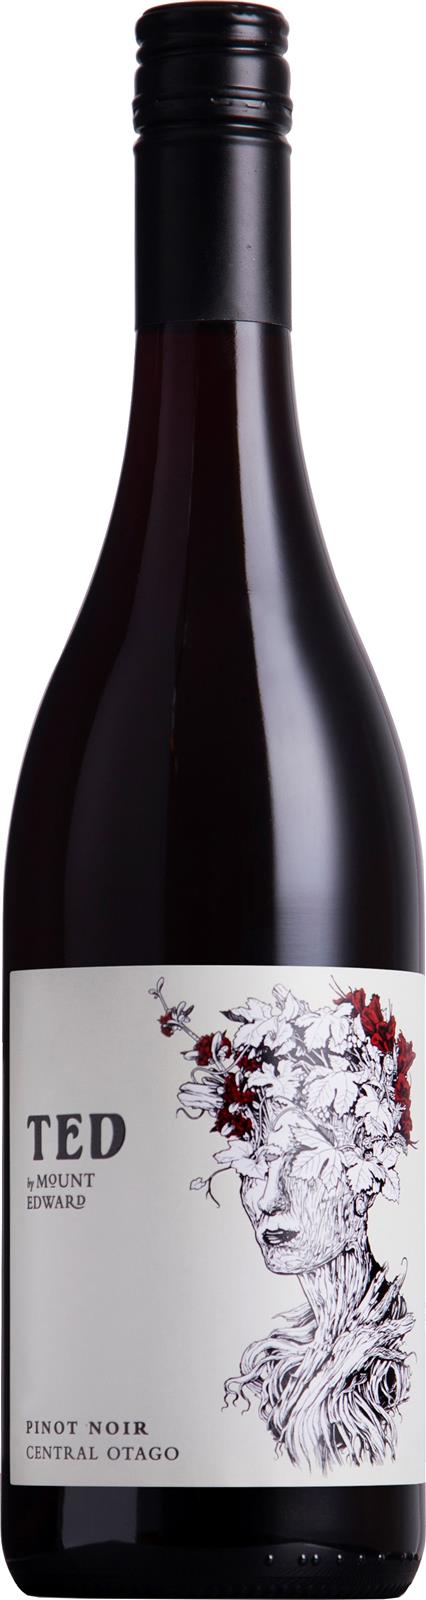 Ted By Mount Edward Central Otago Pinot Noir 2019